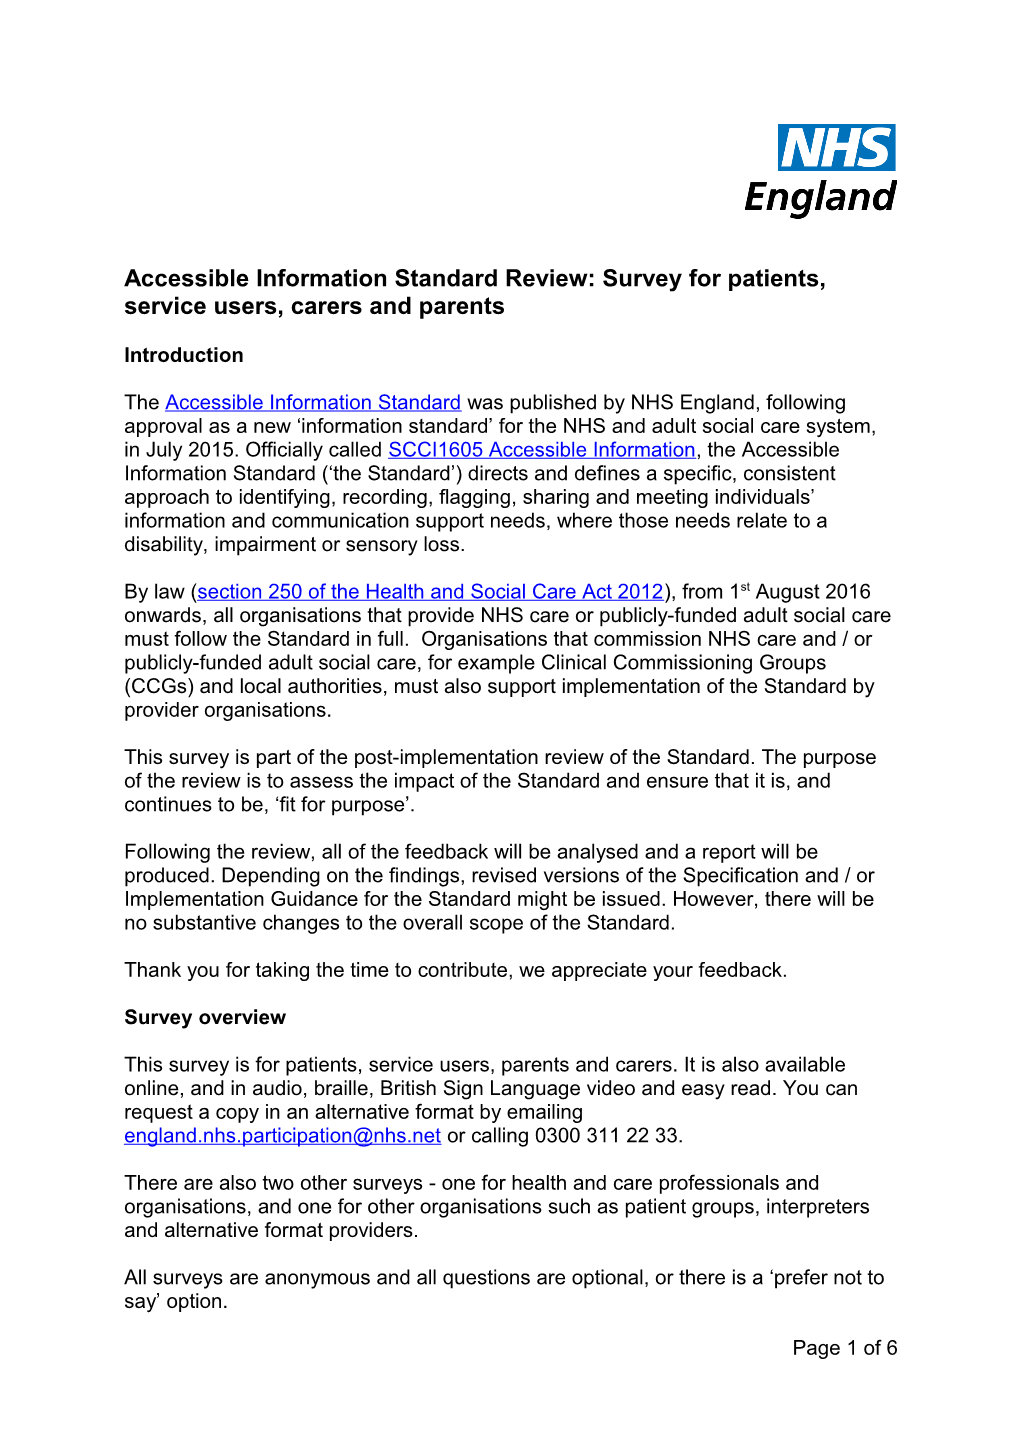 Accessible Information Standard Review: Survey for Patients, Service Users, Carers and Parents